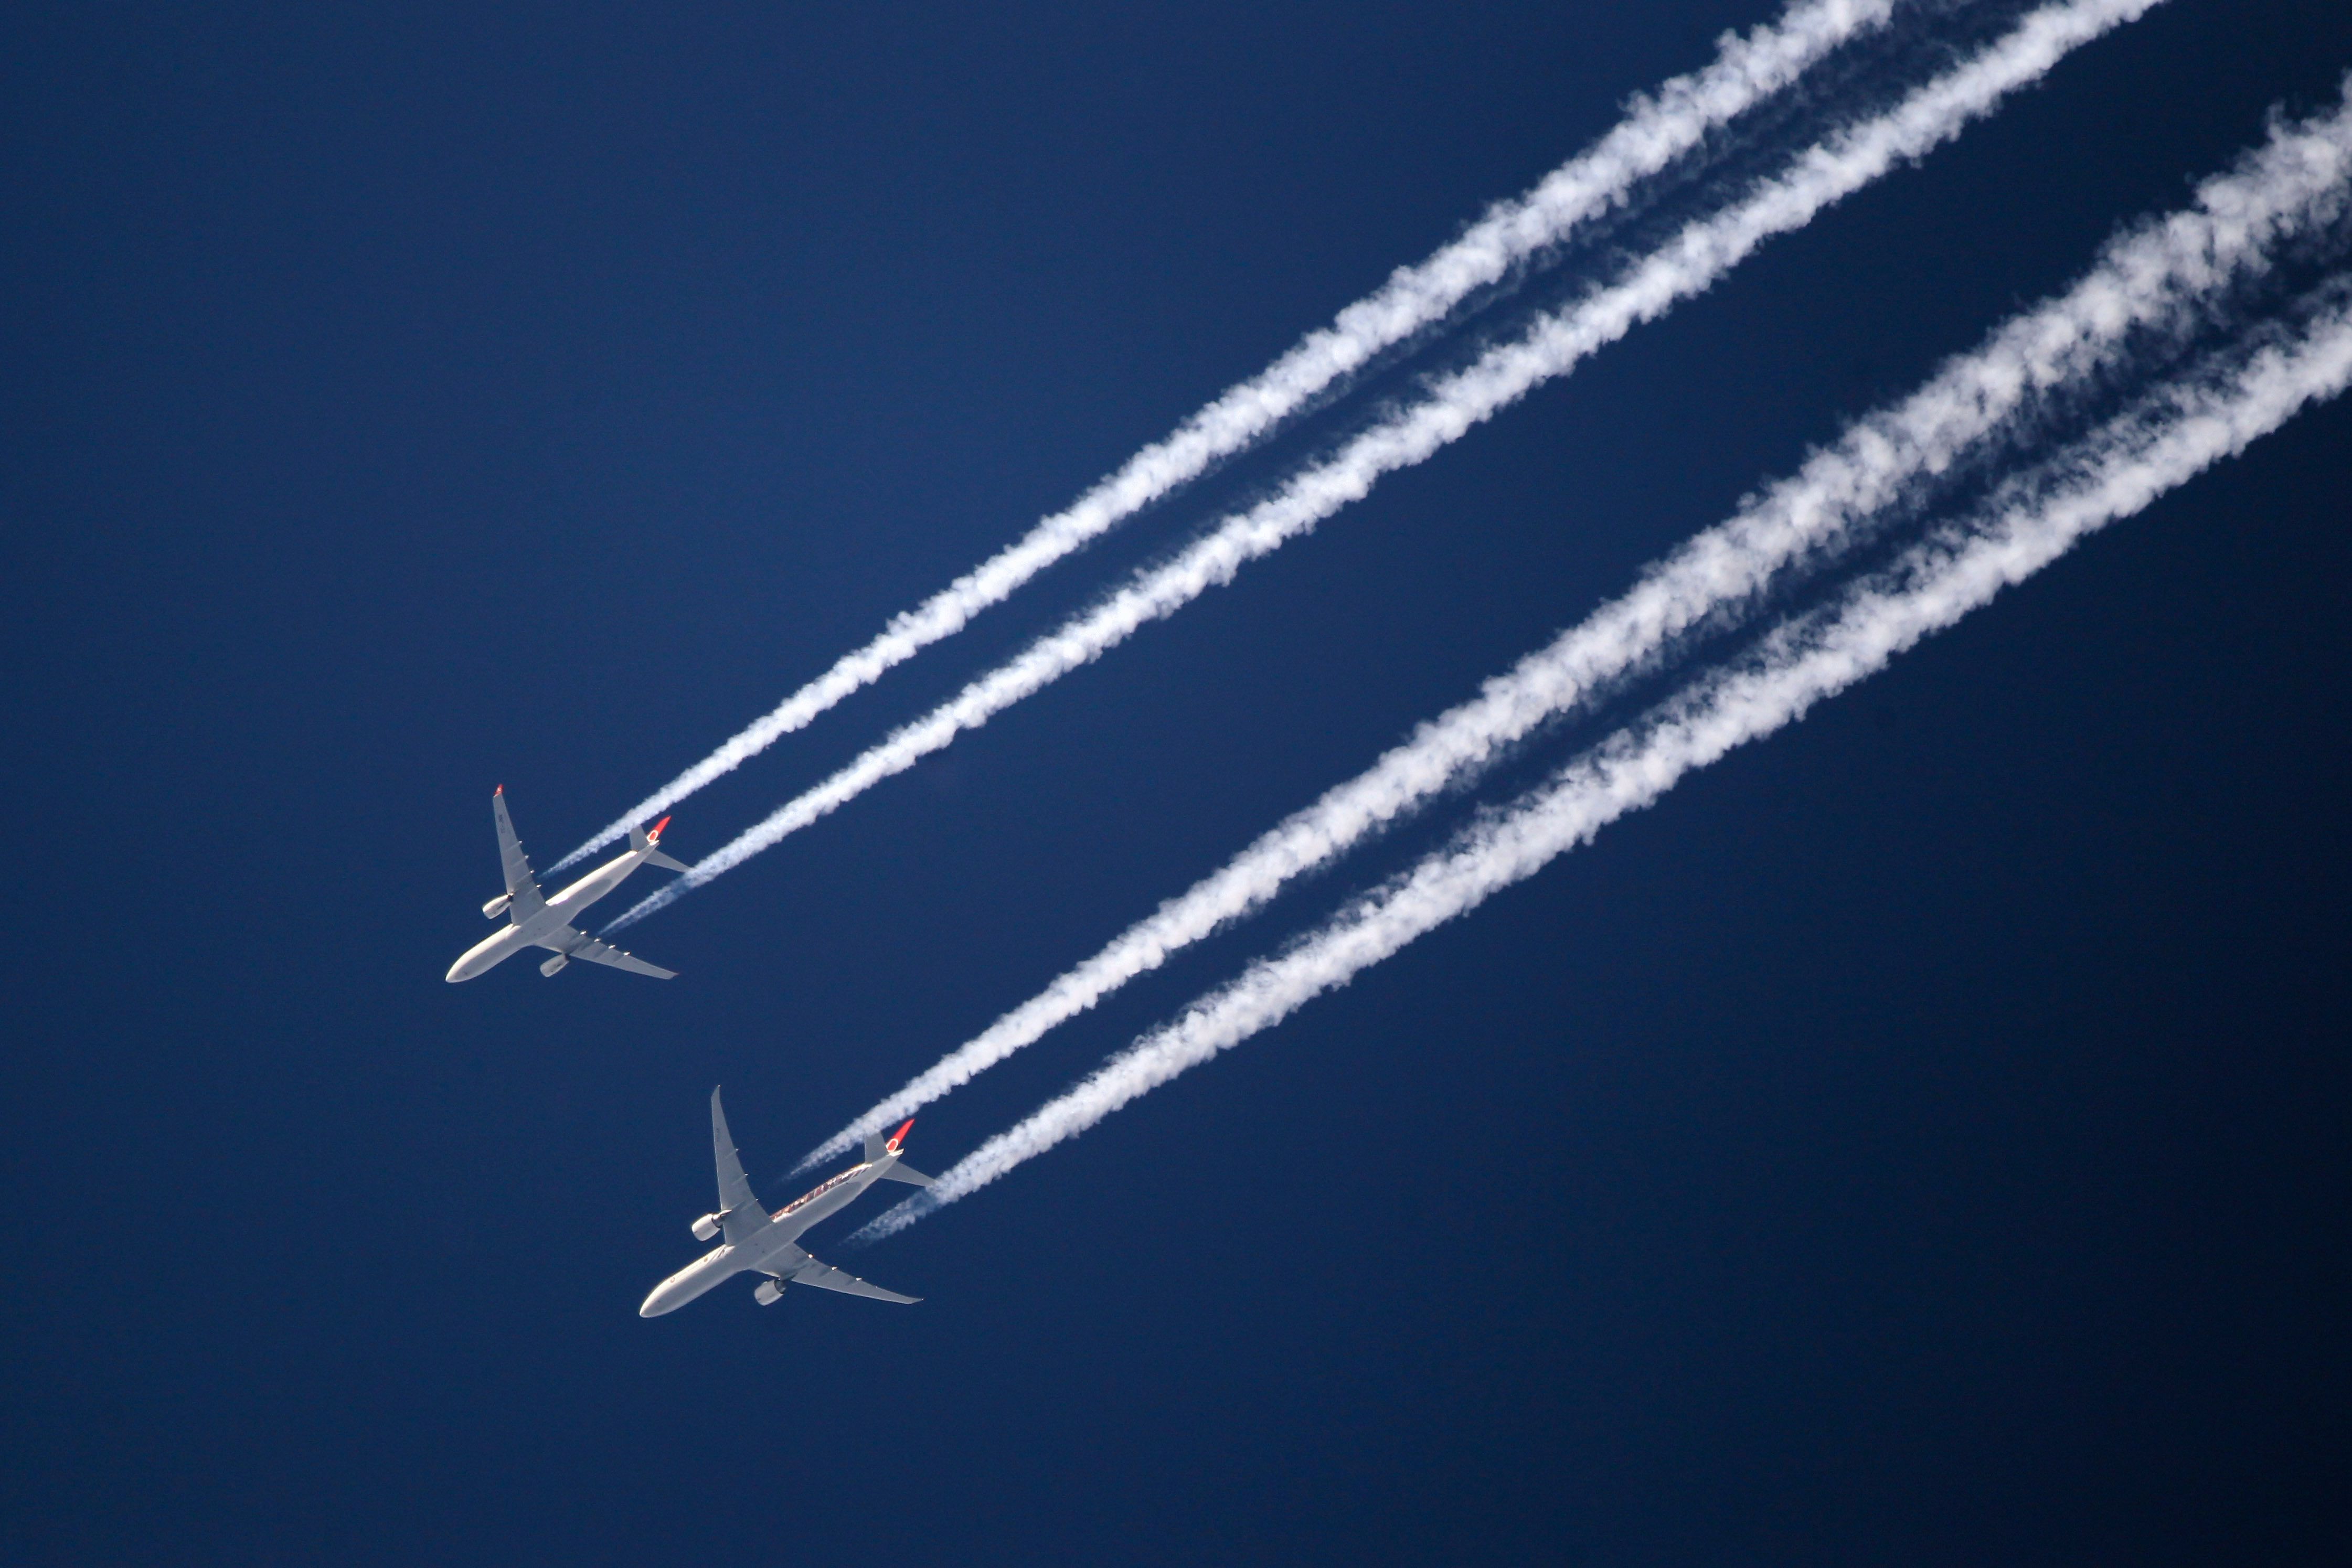 Contrails of two planes in the sky